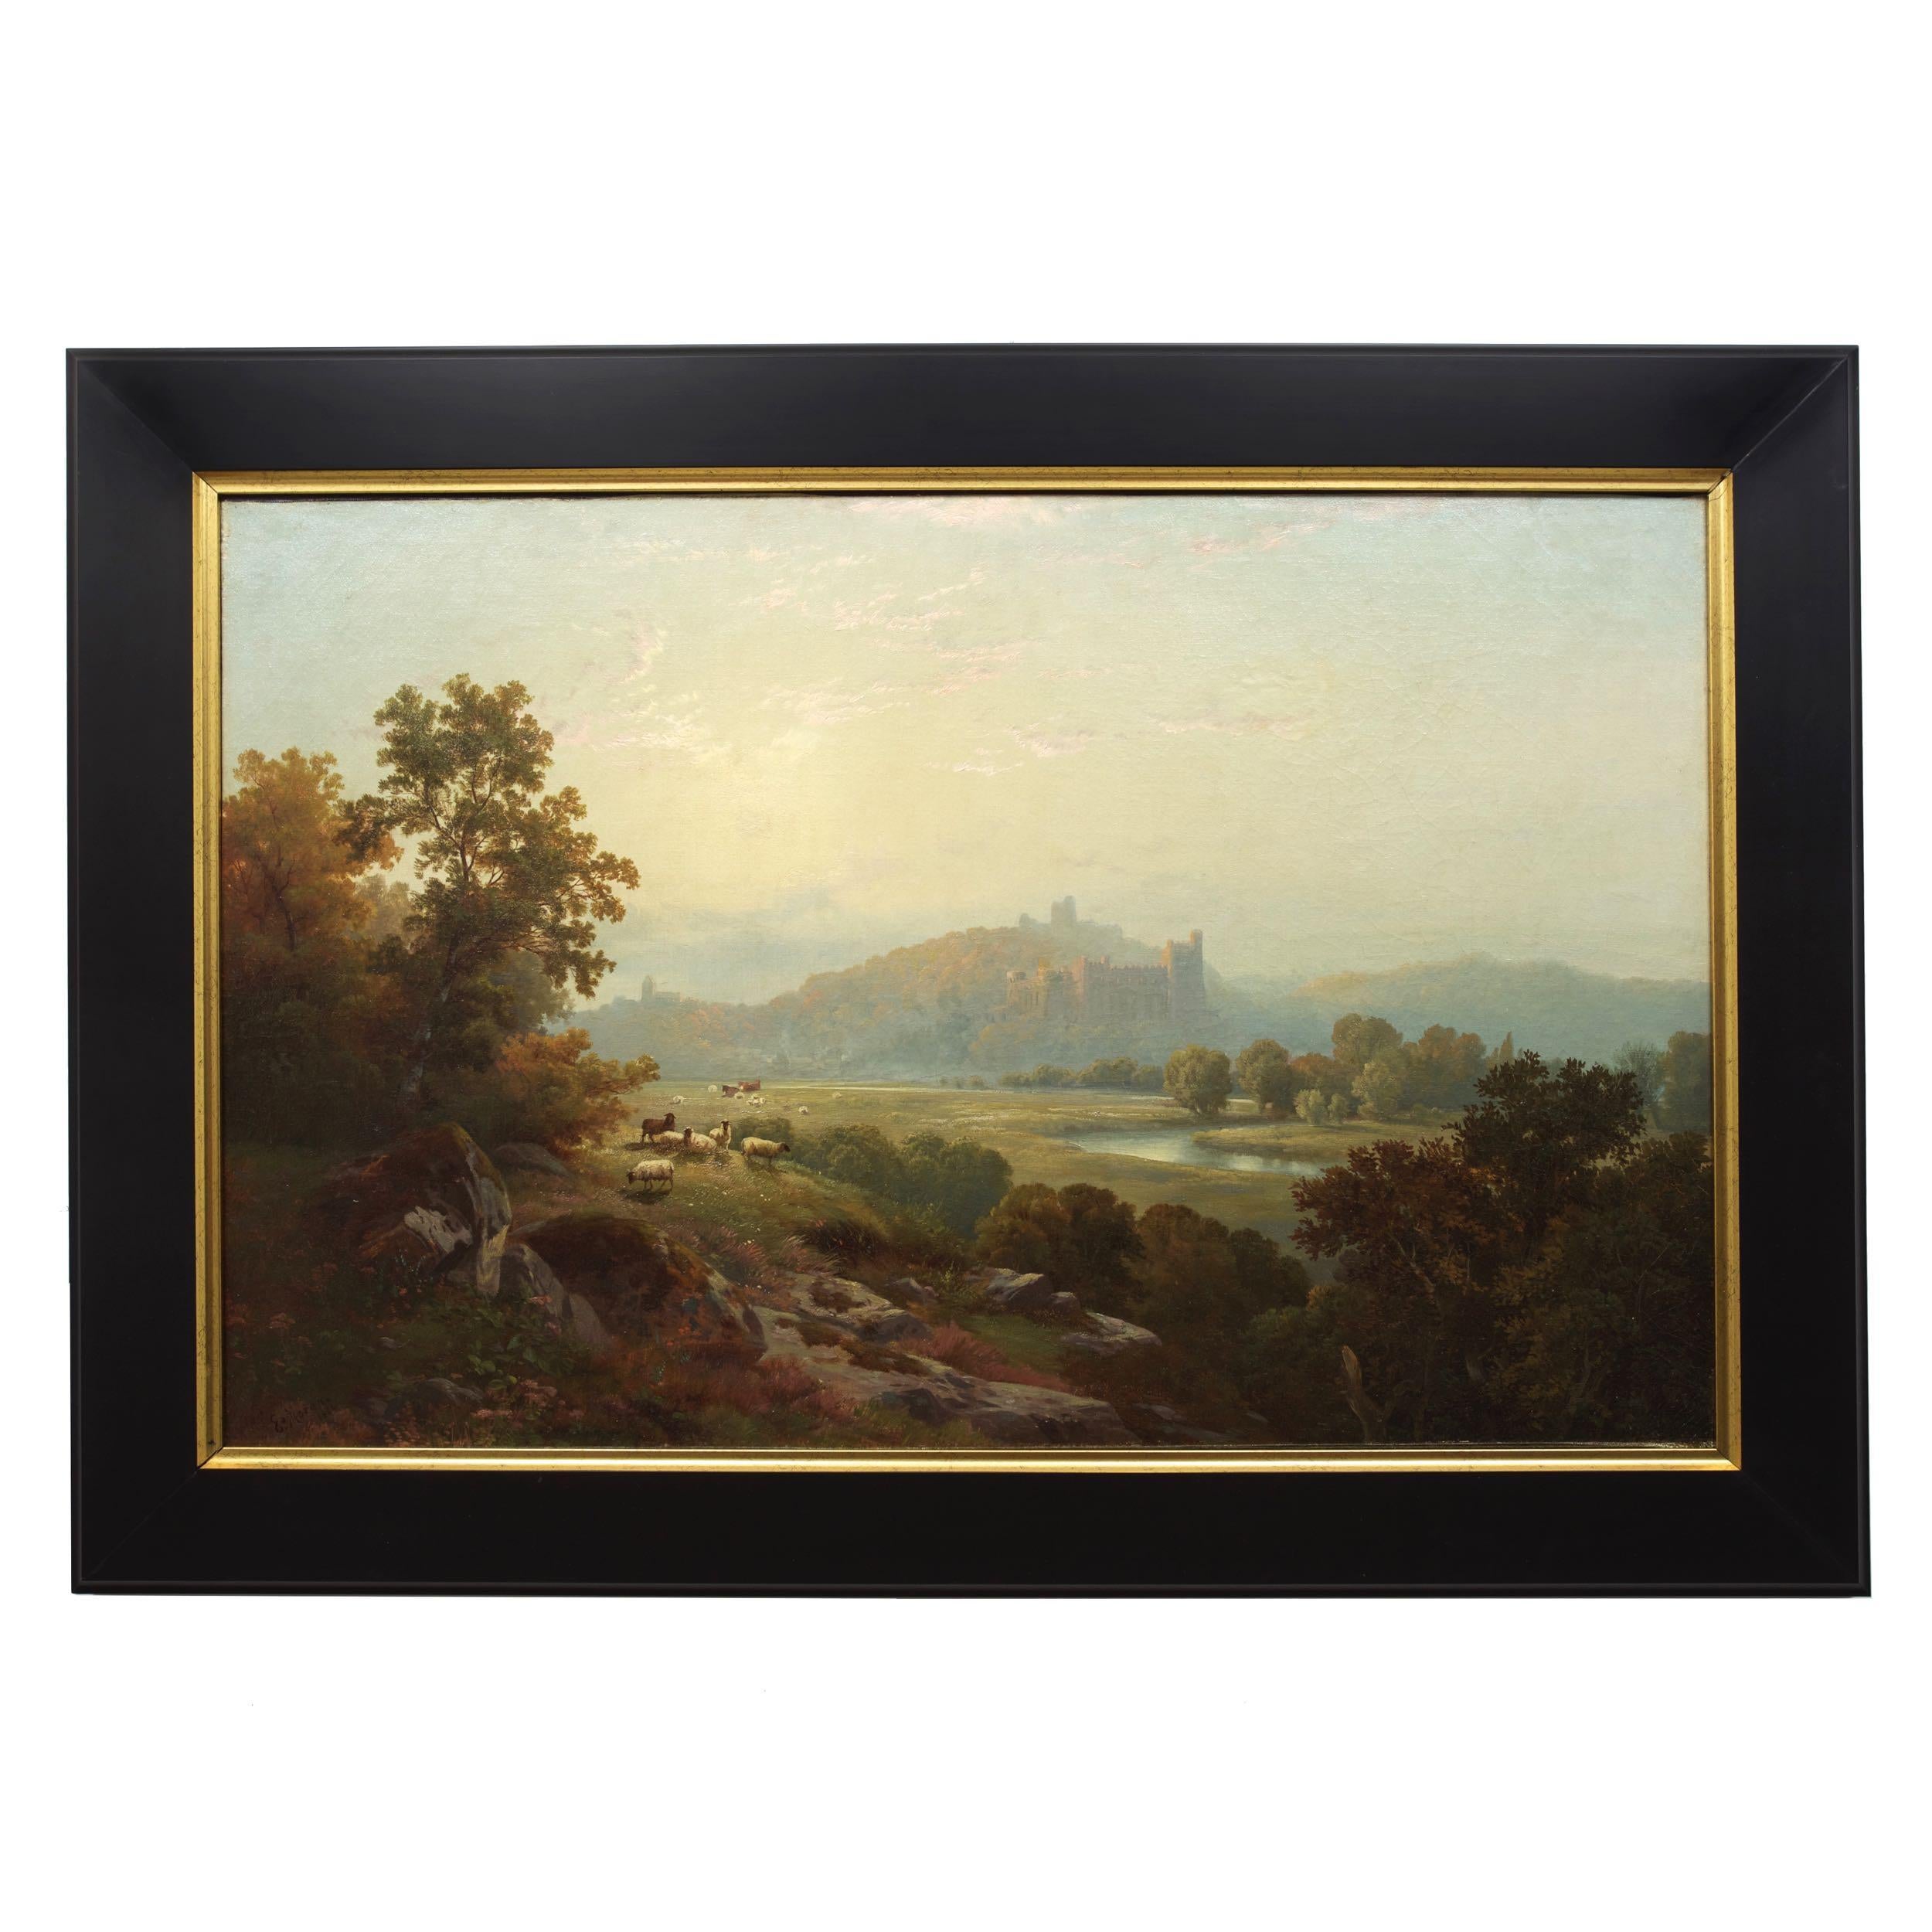 An exquisite landscape painting from relatively early in his career, this vibrant view of the fields before Arundel Castle depicts grazing sheep and cattle before the winding river Arun in the golden hour as evening closes in. There is a heavy